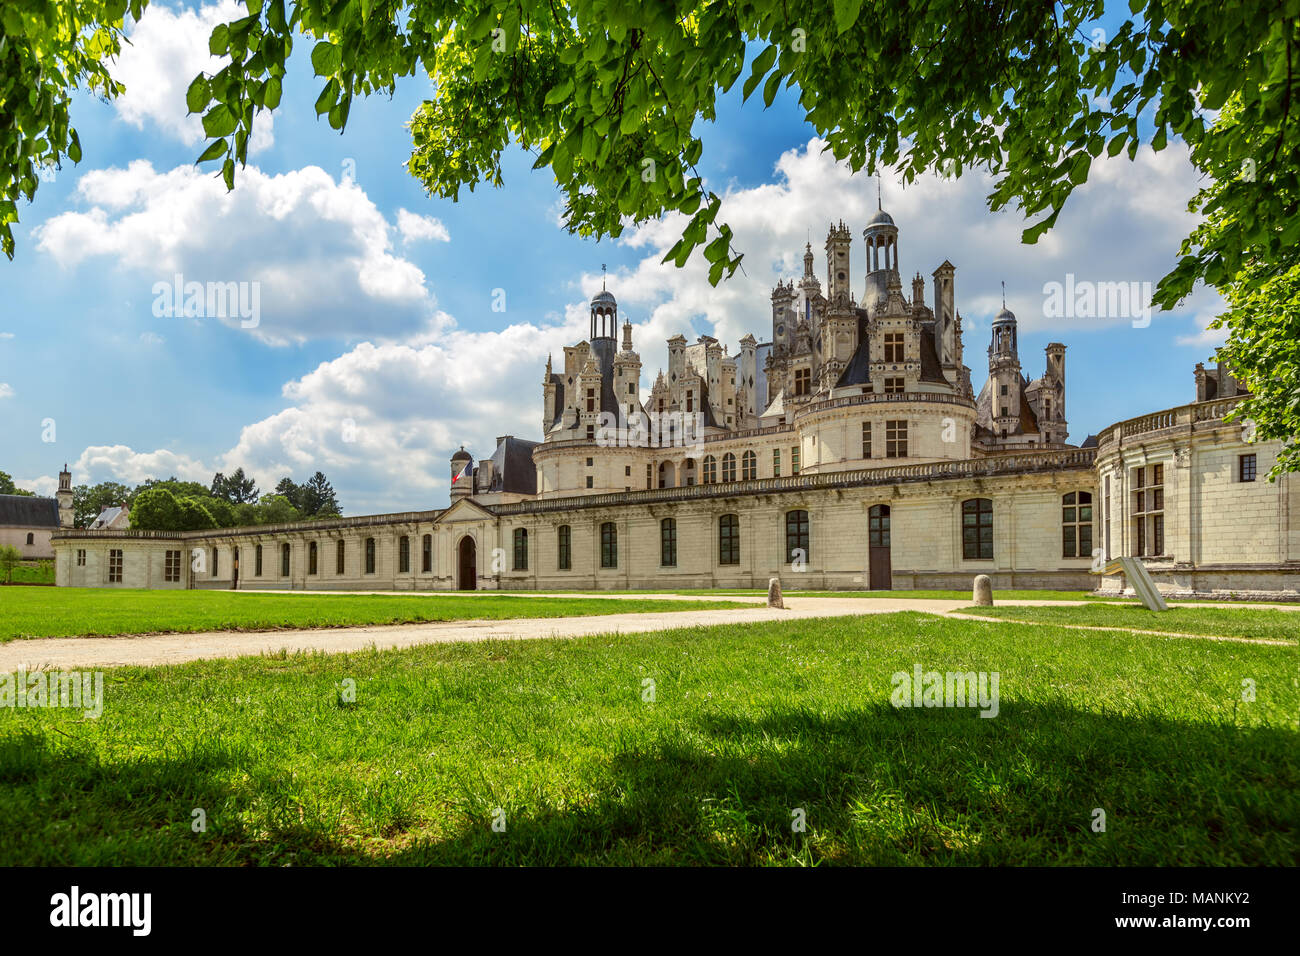 The royal Castle of Chambord in Cher Valley, France Stock Photo